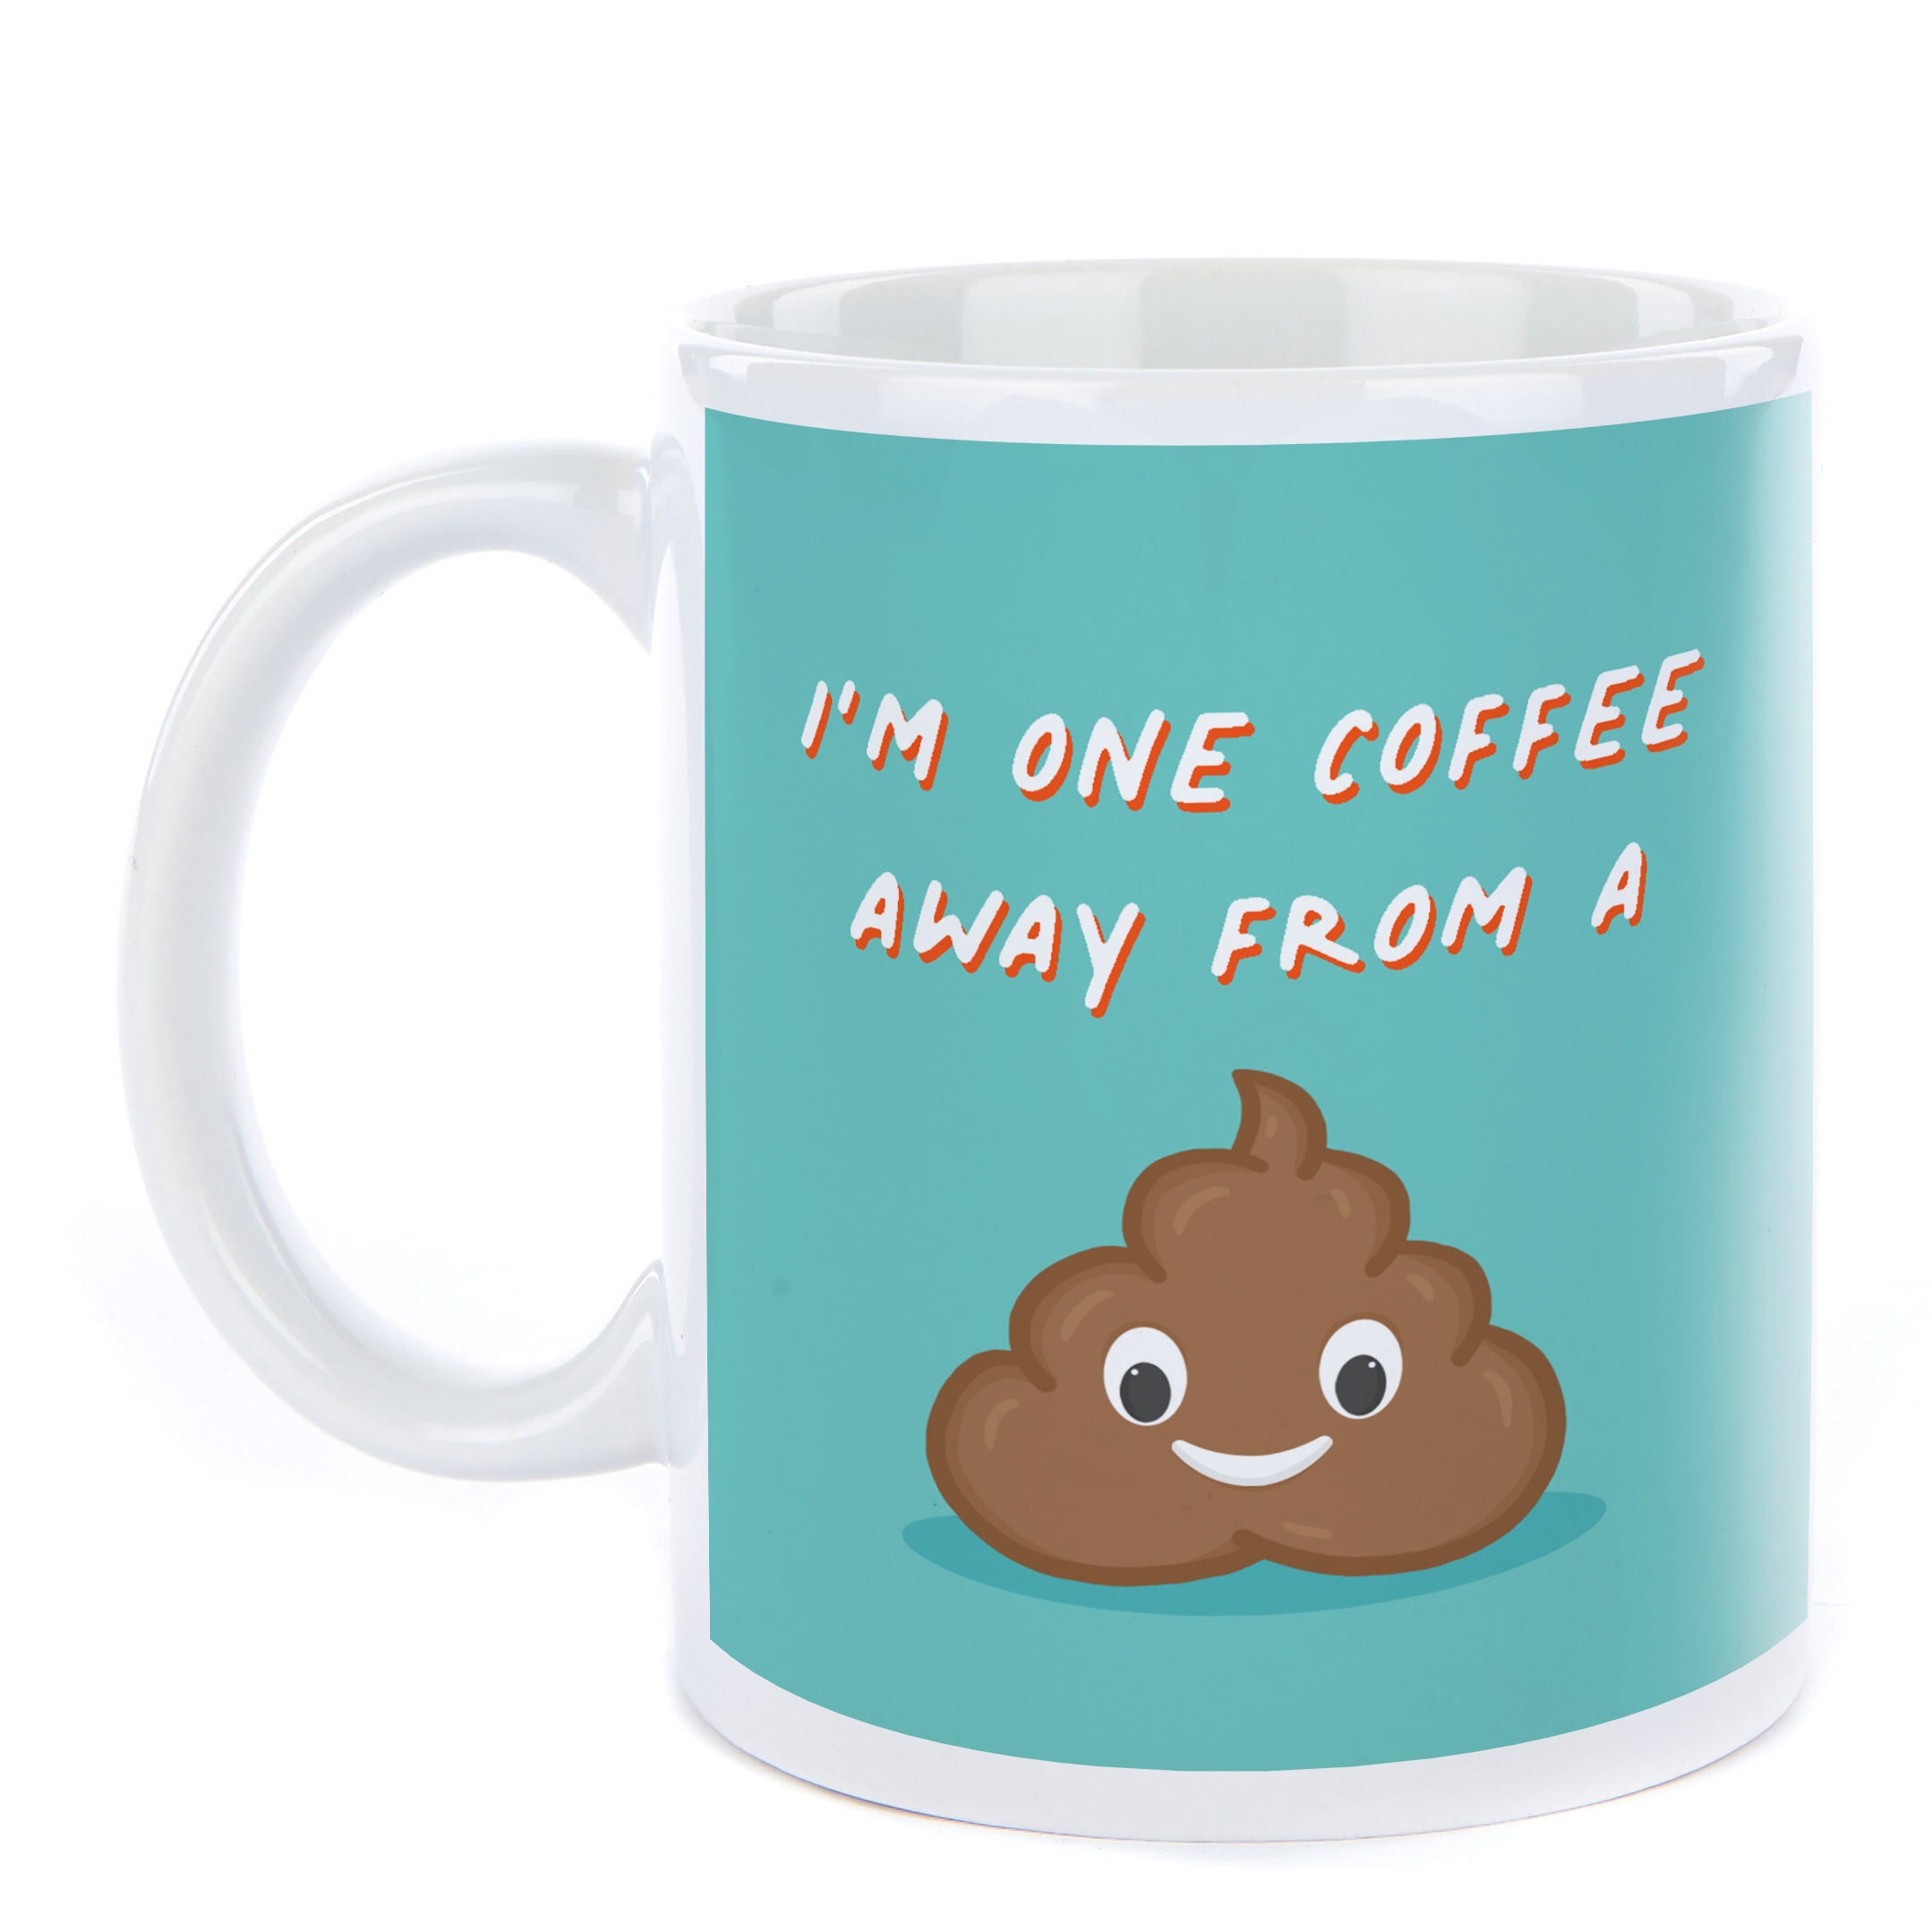 Personalised Mug - One Coffee Away From A...